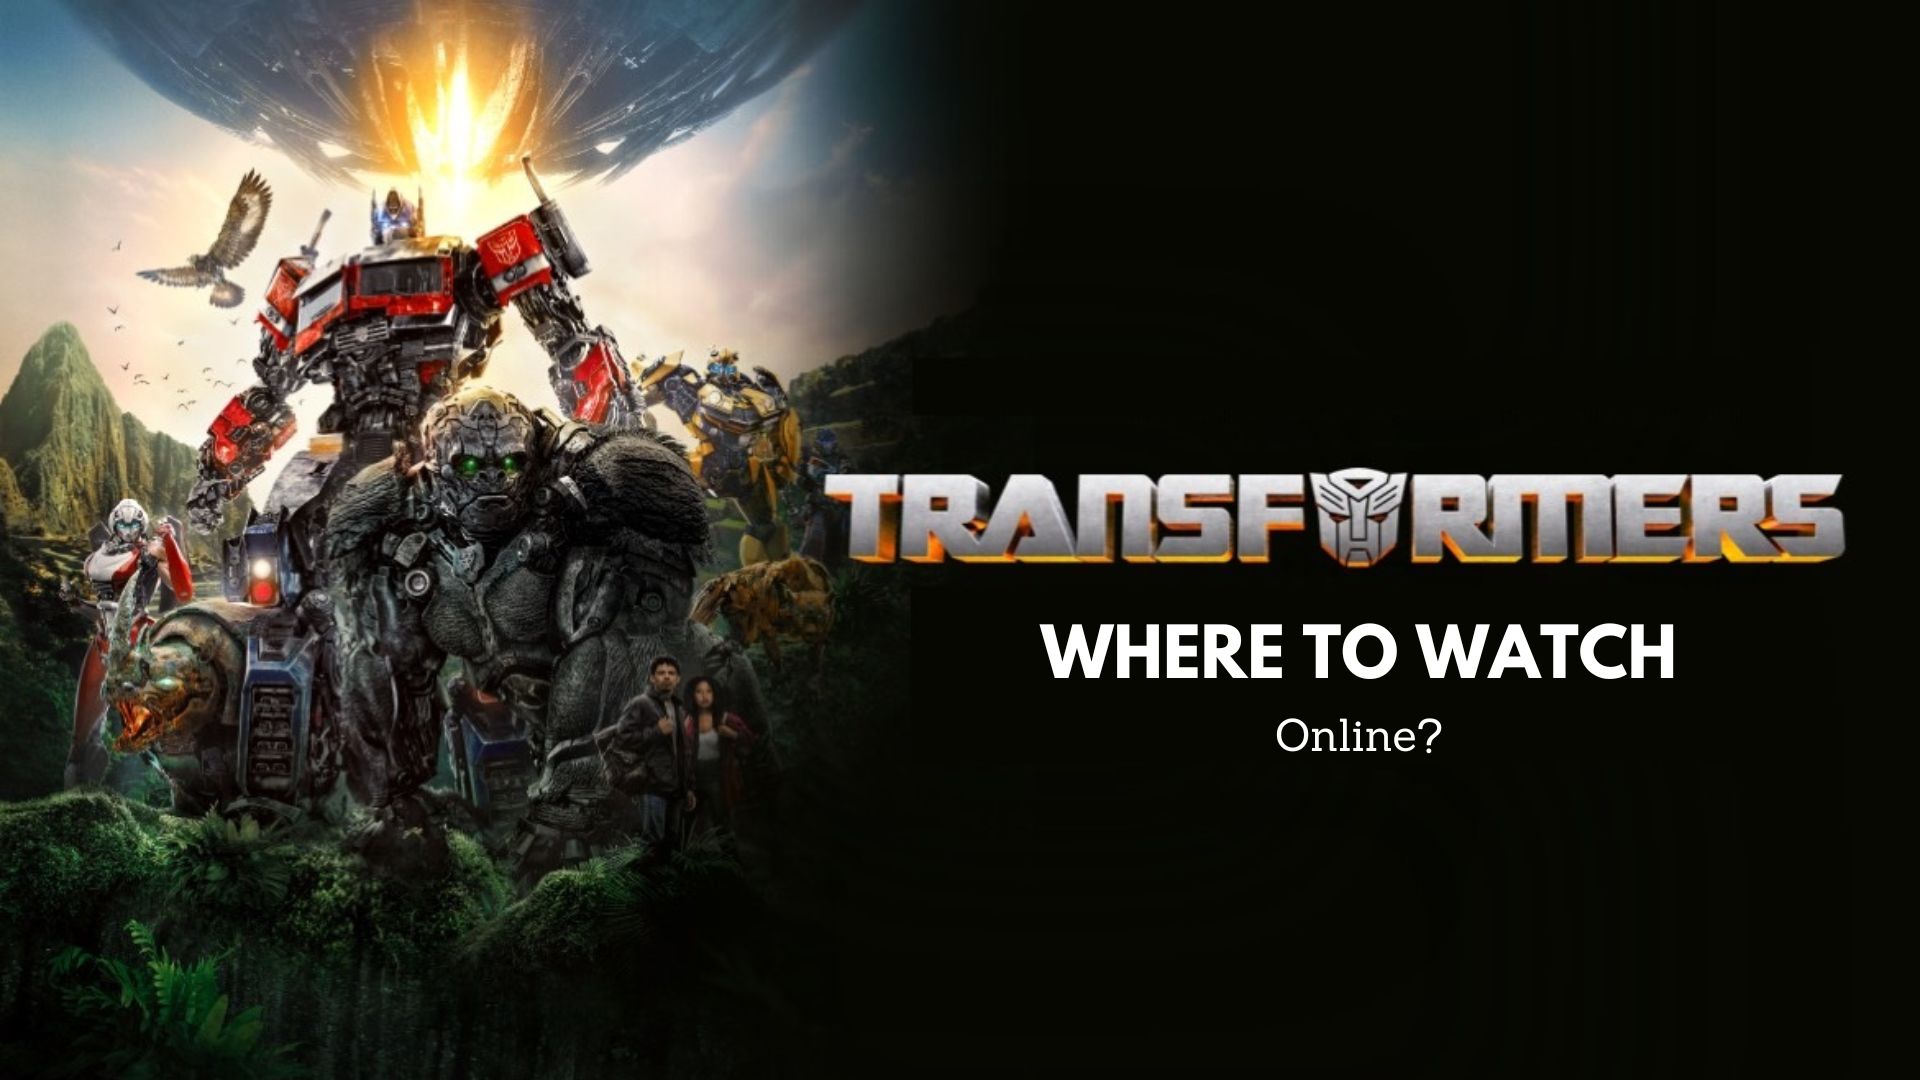 Where To Watch Transformers Online?